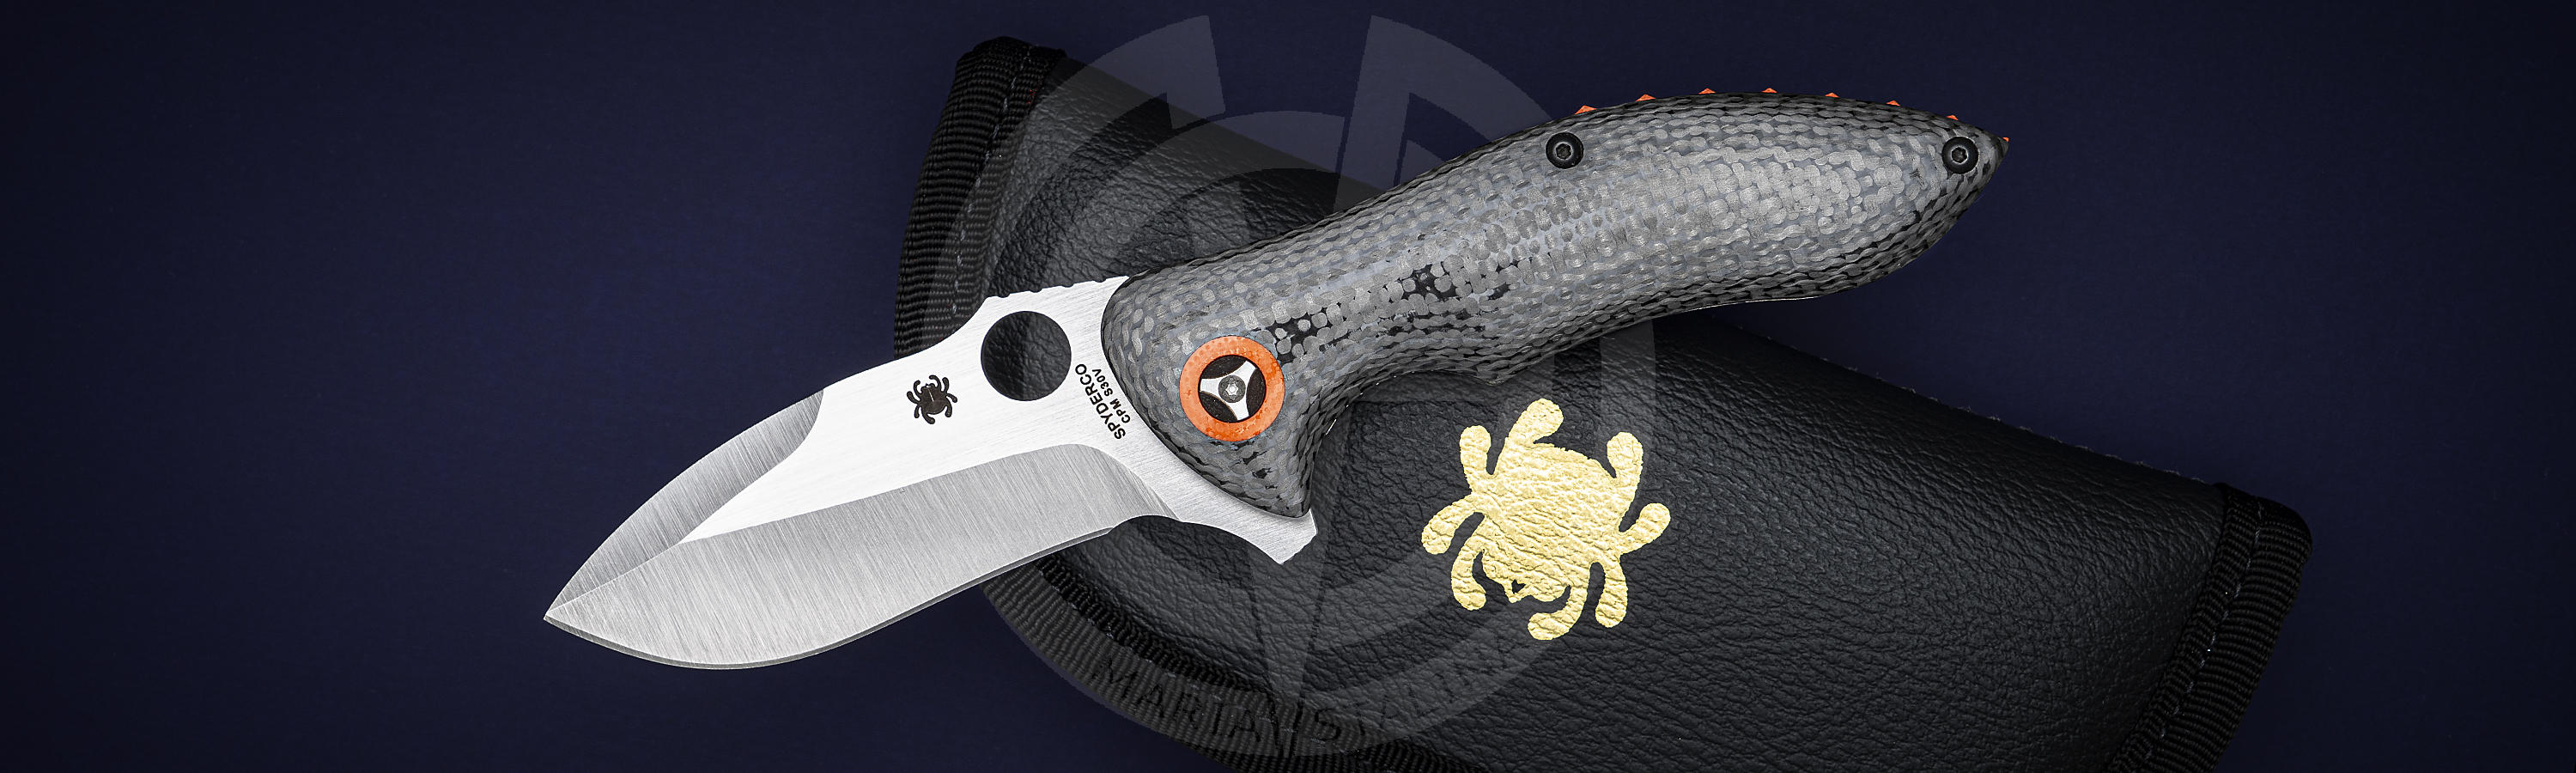 The blade from CPM® S30V® steel and the handle with carbon fiber scales